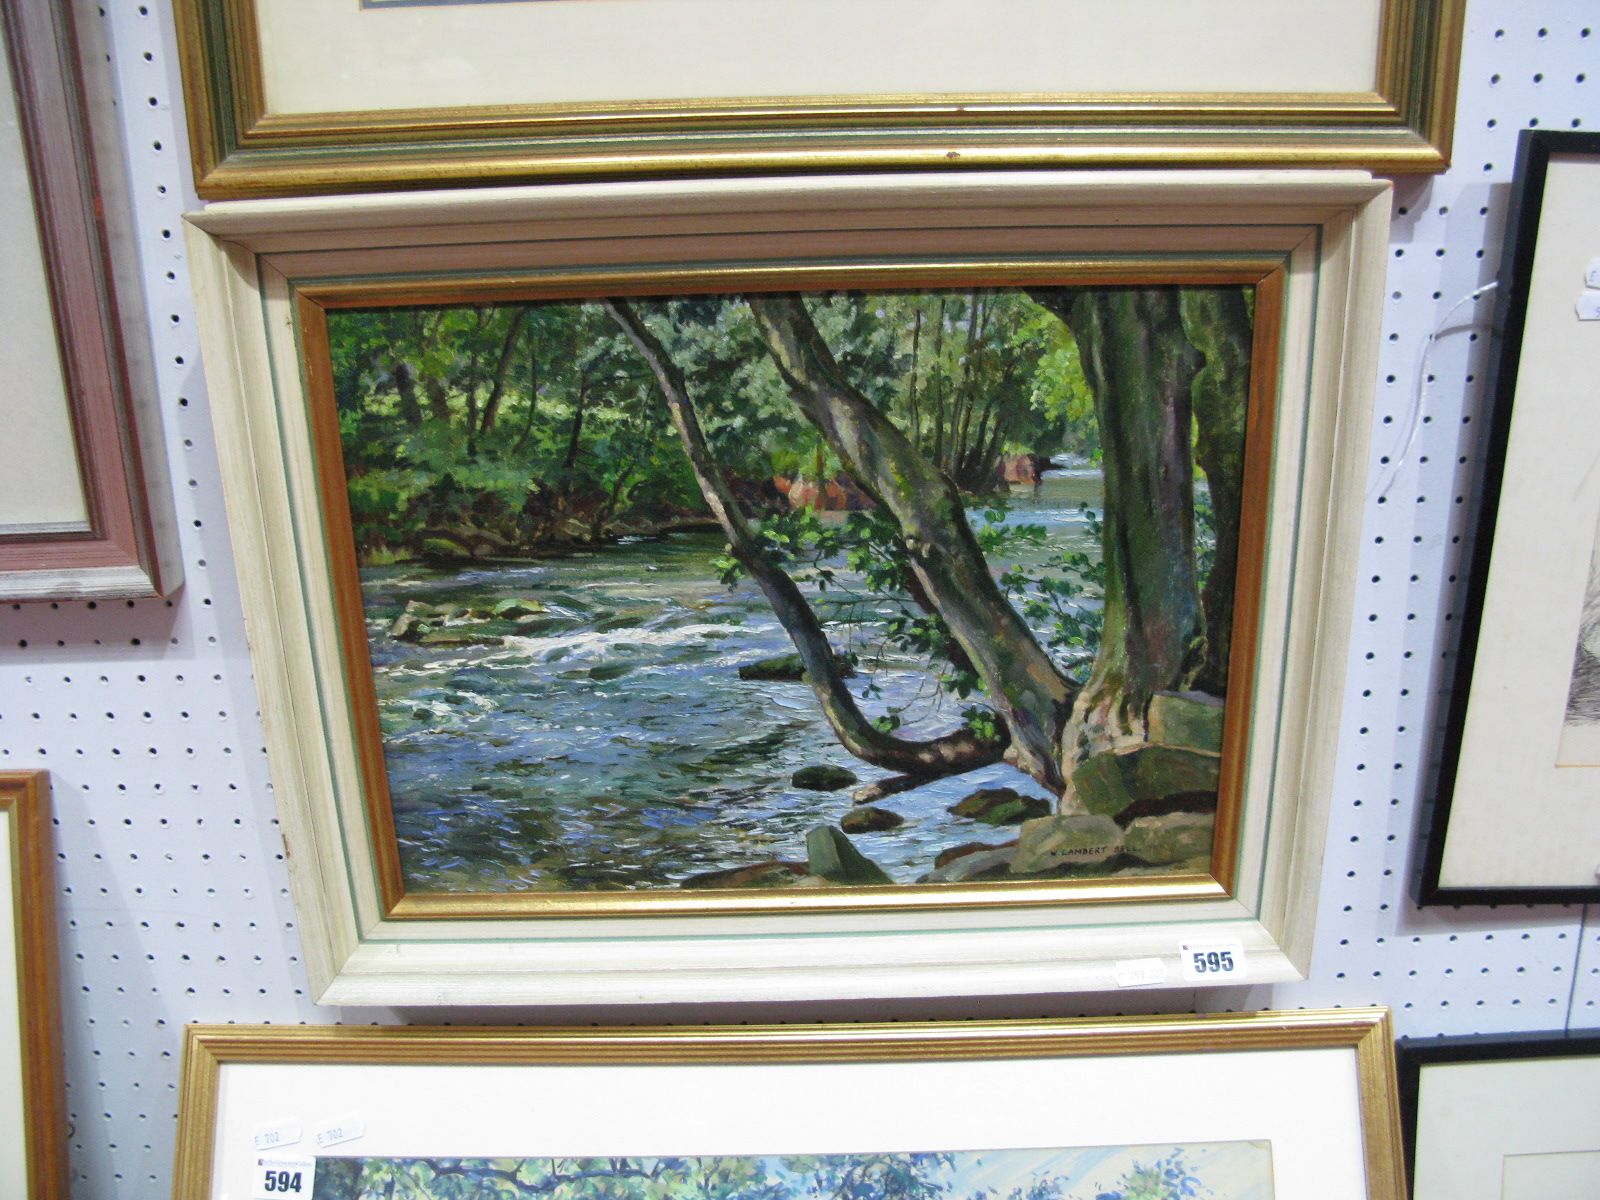 W. Lambert Bell, Oil on Board, Woodland River Scene, 28.5x39cms, signed lower right.